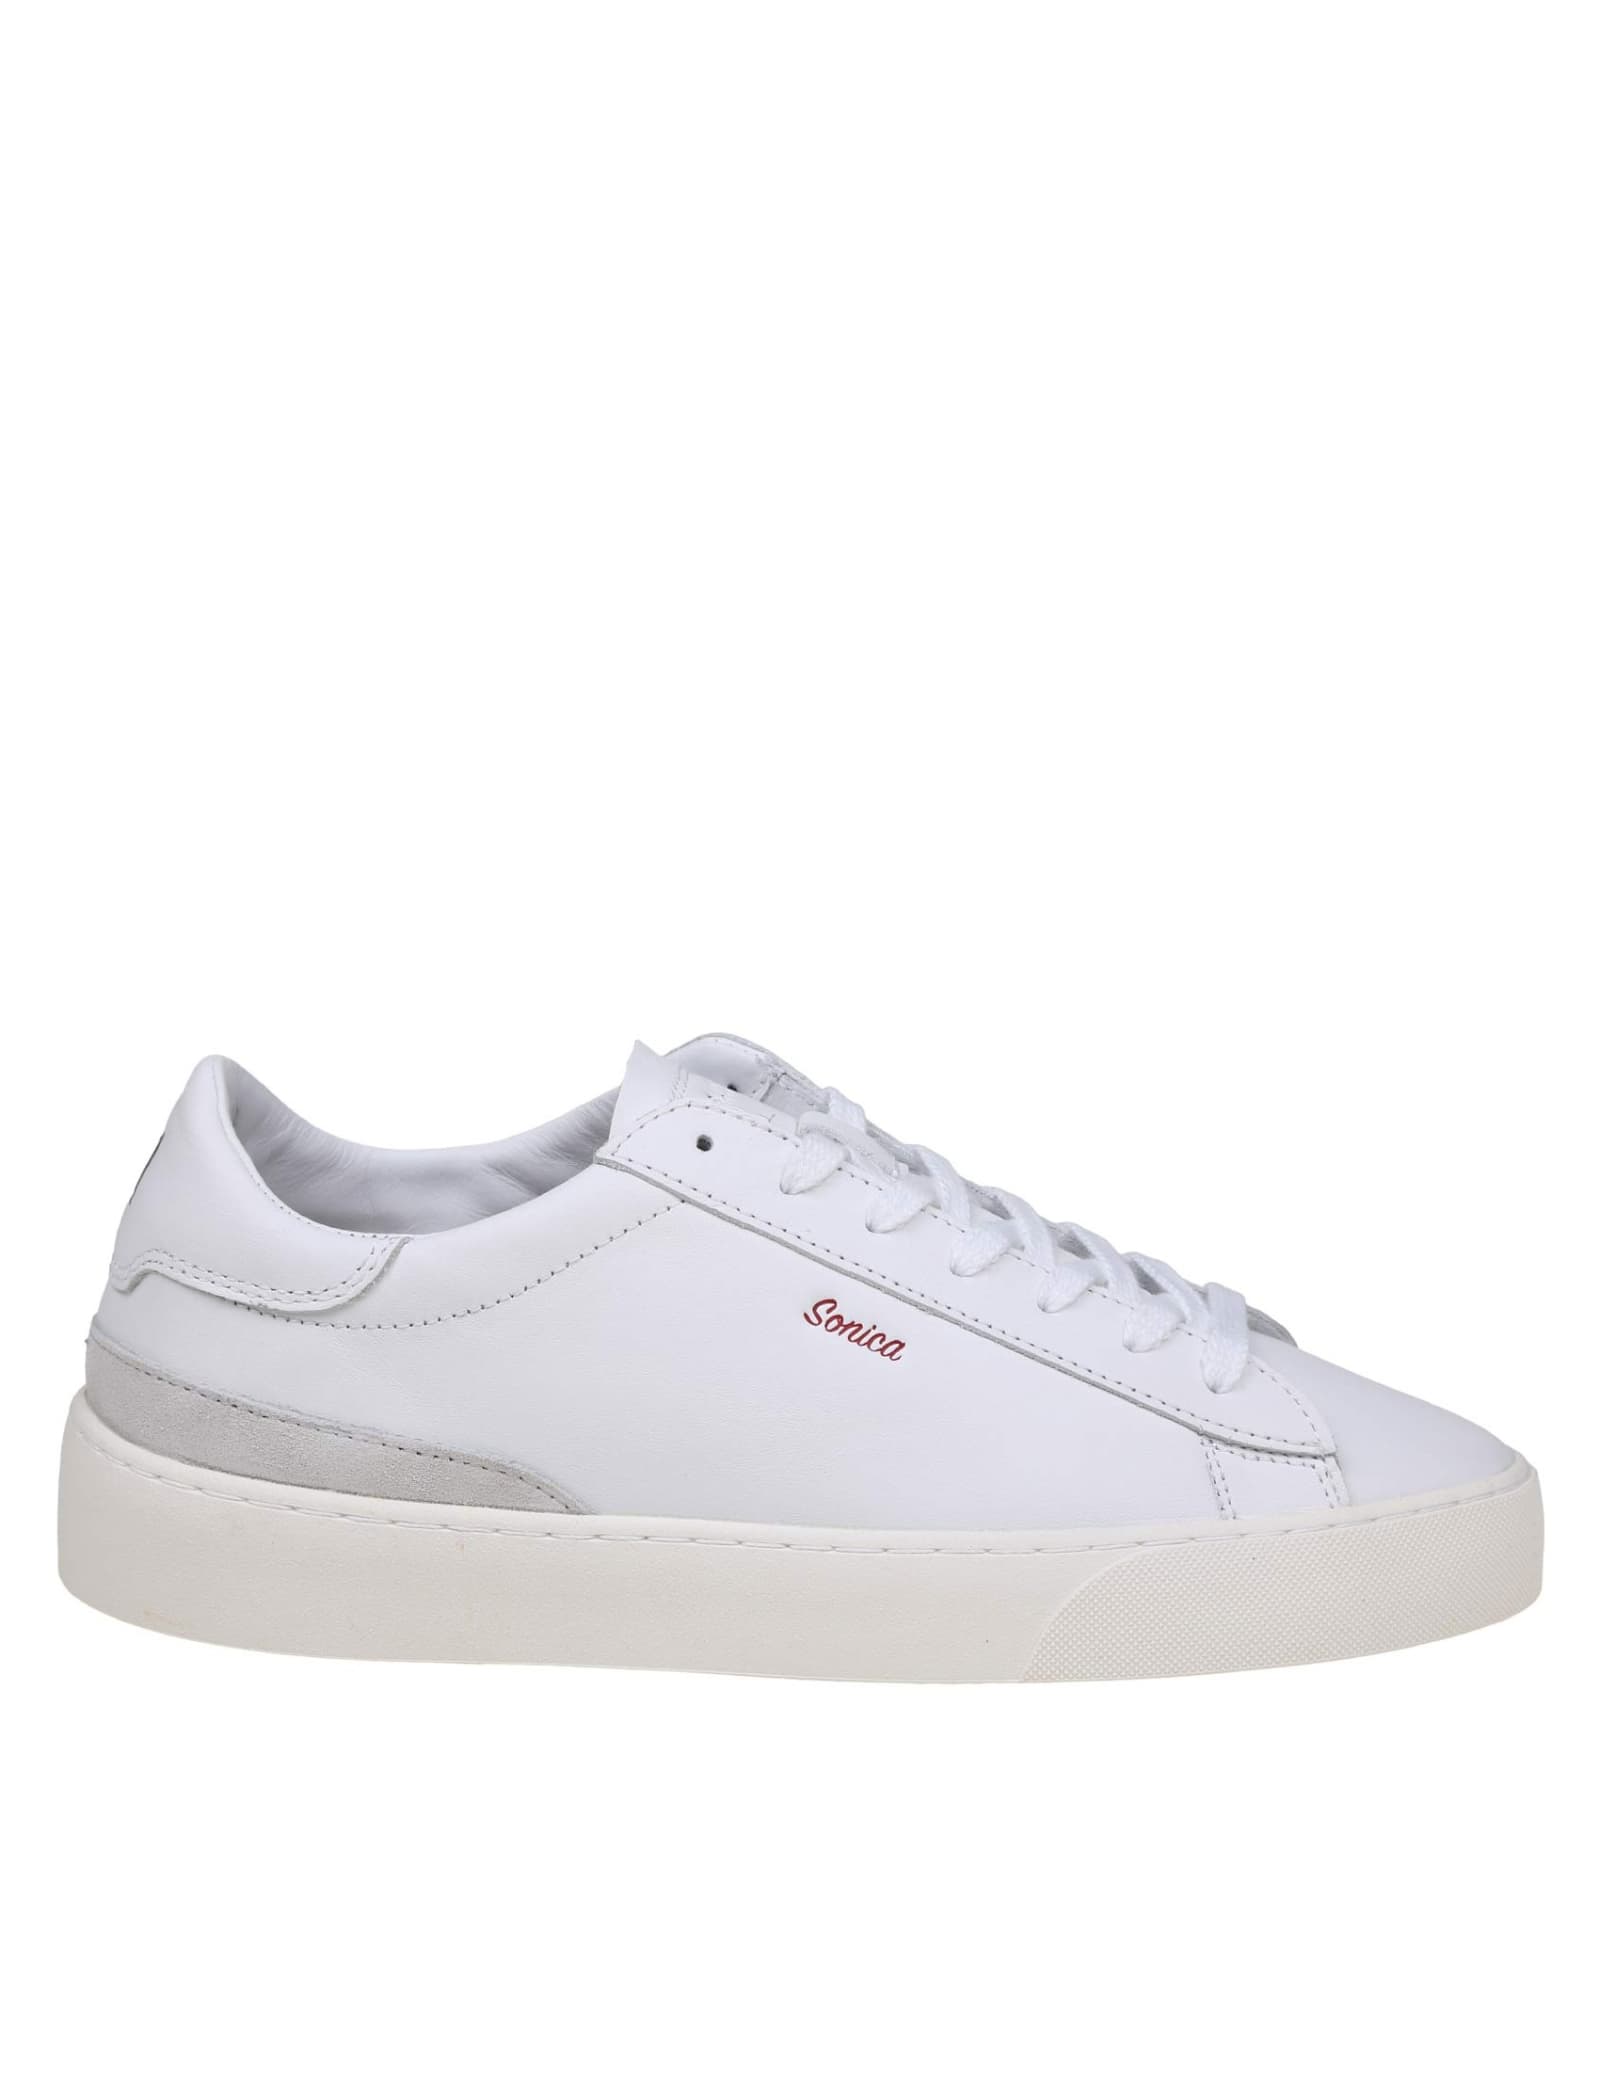 Sonica Sneakers In White Leather And Suede